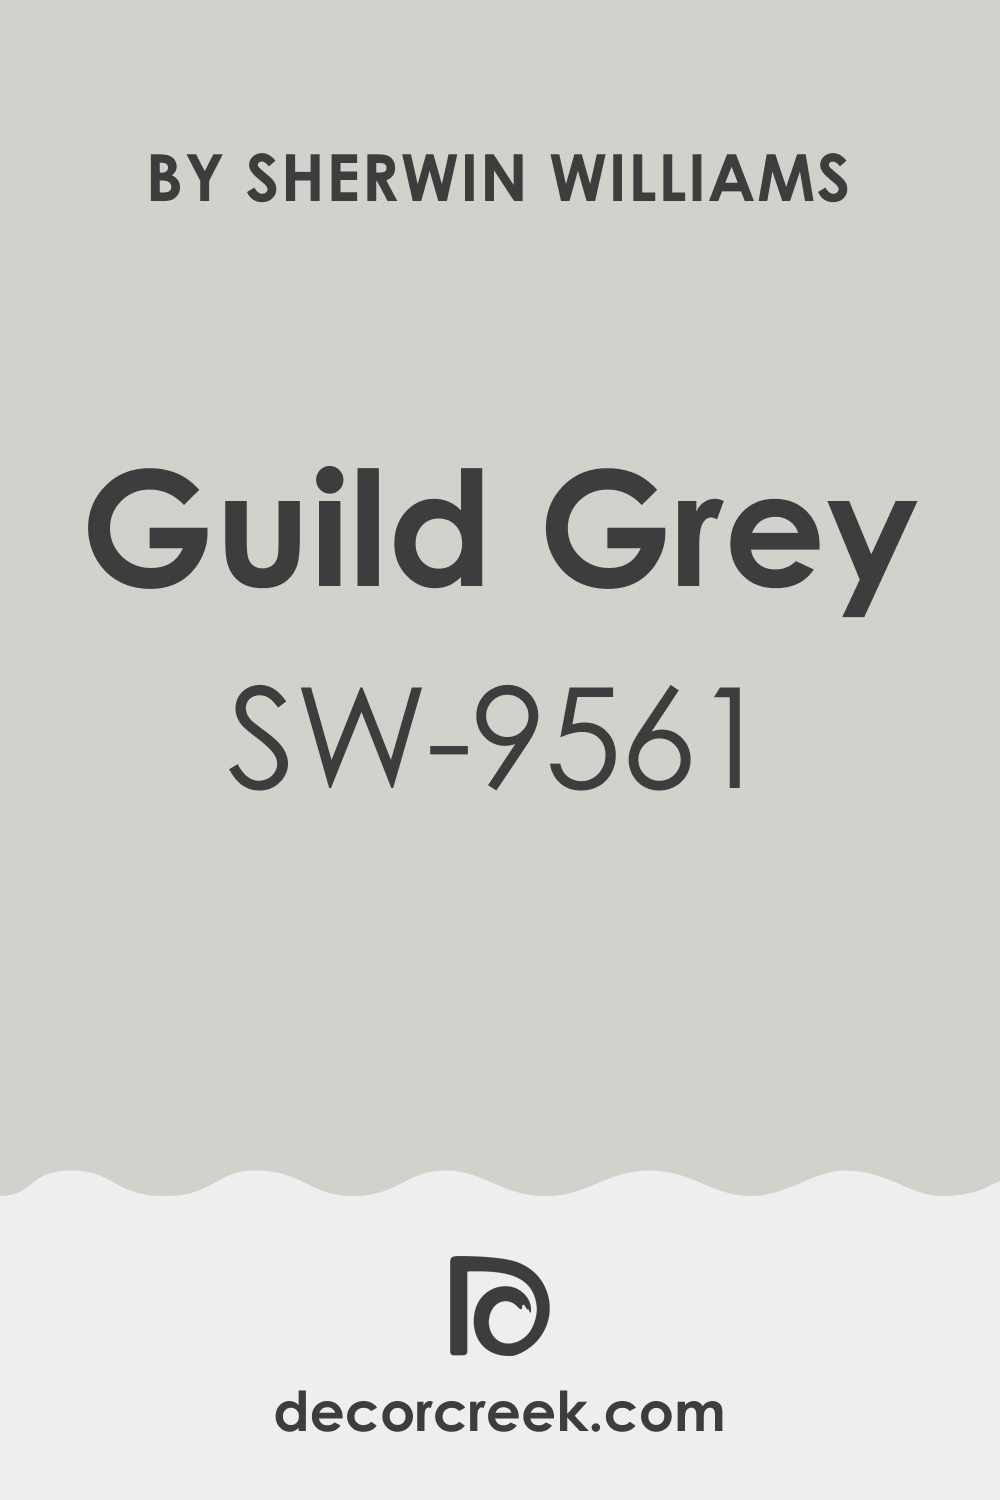 Guild Grey SW 9561 Paint Color by Sherwin-Williams